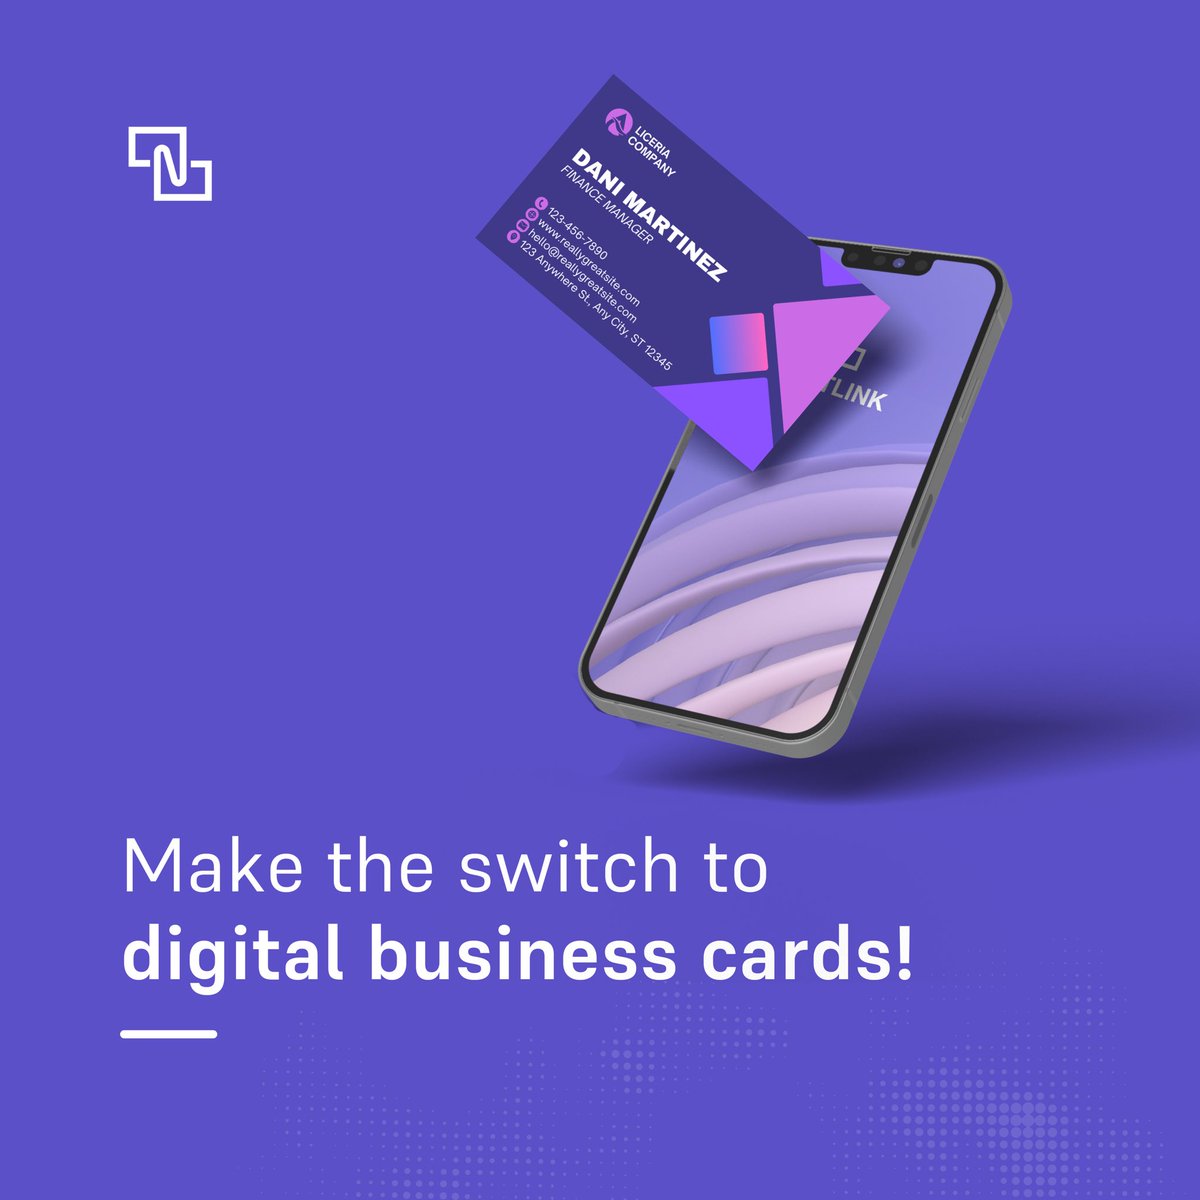 Want to make sure you're always remembered after a networking introduction? 

Break the norm with NextLink! 

Simply tap to connect with our innovative digital business card feature and make a lasting impression every time. 

#NetworkingRevolution #NextLink #BreakTheNorm